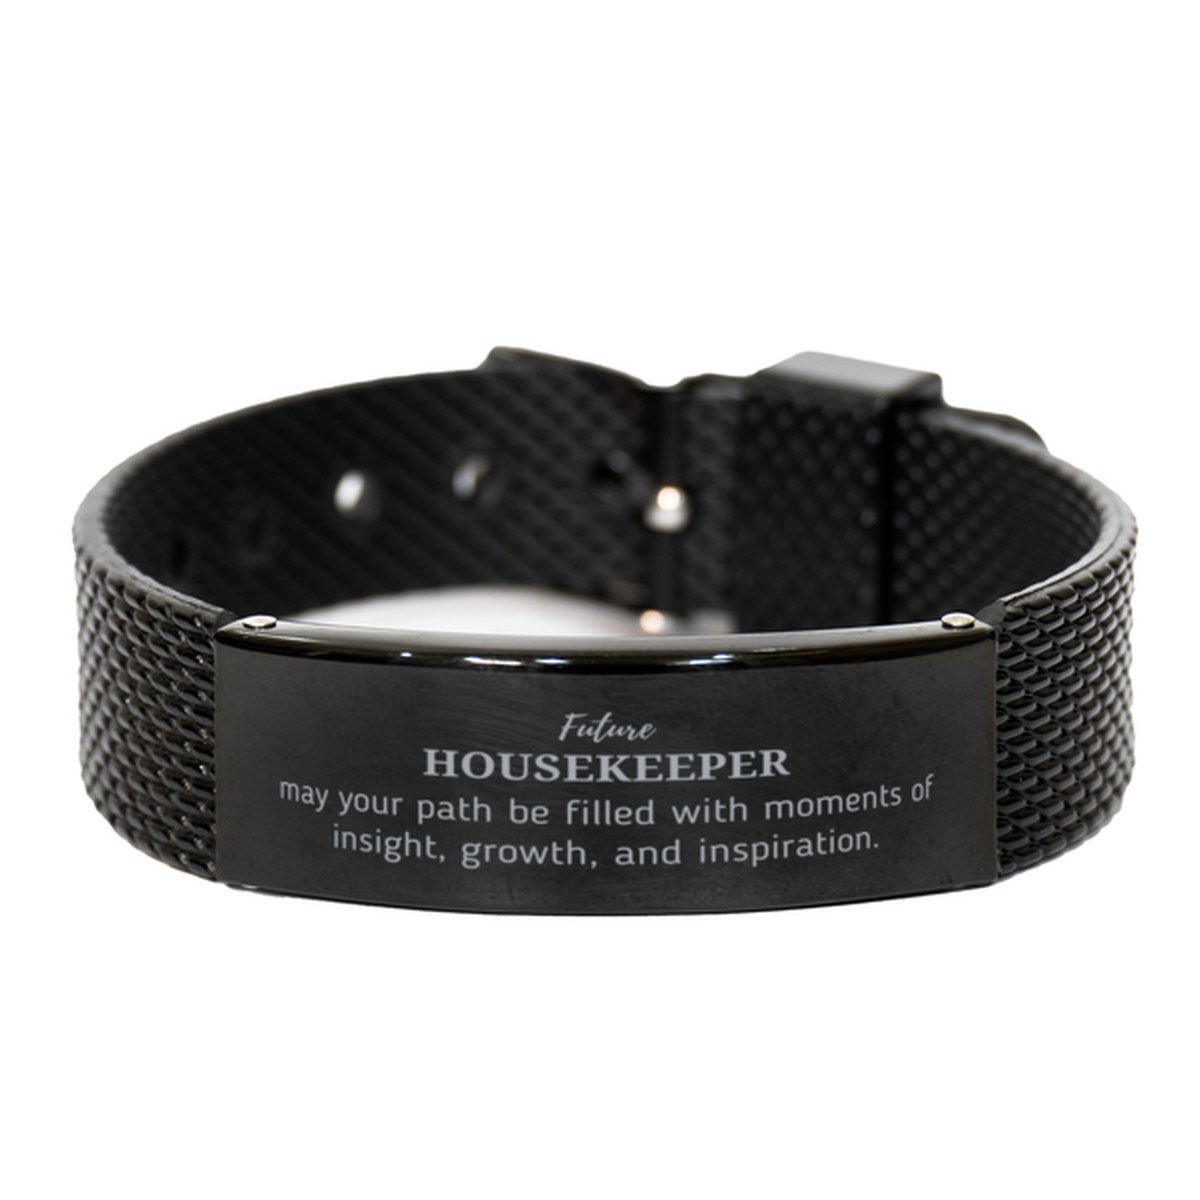 Future Housekeeper Gifts, May your path be filled with moments of insight, Graduation Gifts for New Housekeeper, Christmas Unique Black Shark Mesh Bracelet For Men, Women, Friends